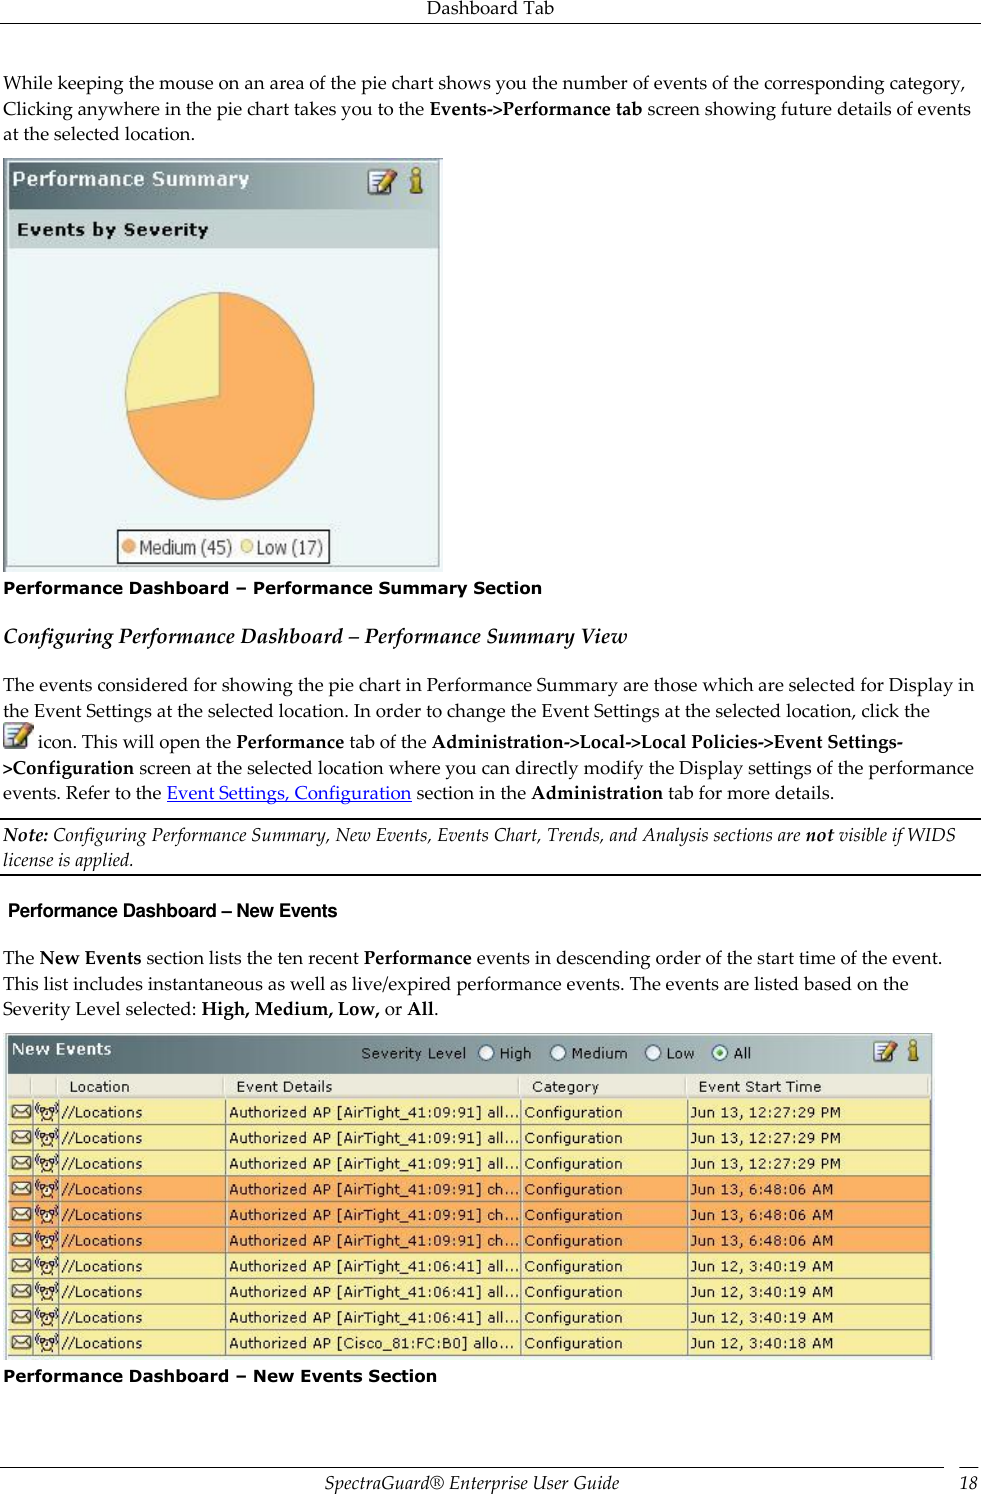 Dashboard Tab SpectraGuard®  Enterprise User Guide 18 While keeping the mouse on an area of the pie chart shows you the number of events of the corresponding category, Clicking anywhere in the pie chart takes you to the Events-&gt;Performance tab screen showing future details of events at the selected location.  Performance Dashboard – Performance Summary Section Configuring Performance Dashboard – Performance Summary View The events considered for showing the pie chart in Performance Summary are those which are selected for Display in the Event Settings at the selected location. In order to change the Event Settings at the selected location, click the  icon. This will open the Performance tab of the Administration-&gt;Local-&gt;Local Policies-&gt;Event Settings-&gt;Configuration screen at the selected location where you can directly modify the Display settings of the performance events. Refer to the Event Settings, Configuration section in the Administration tab for more details. Note: Configuring Performance Summary, New Events, Events Chart, Trends, and Analysis sections are not visible if WIDS license is applied.  Performance Dashboard – New Events The New Events section lists the ten recent Performance events in descending order of the start time of the event. This list includes instantaneous as well as live/expired performance events. The events are listed based on the Severity Level selected: High, Medium, Low, or All.  Performance Dashboard – New Events Section 